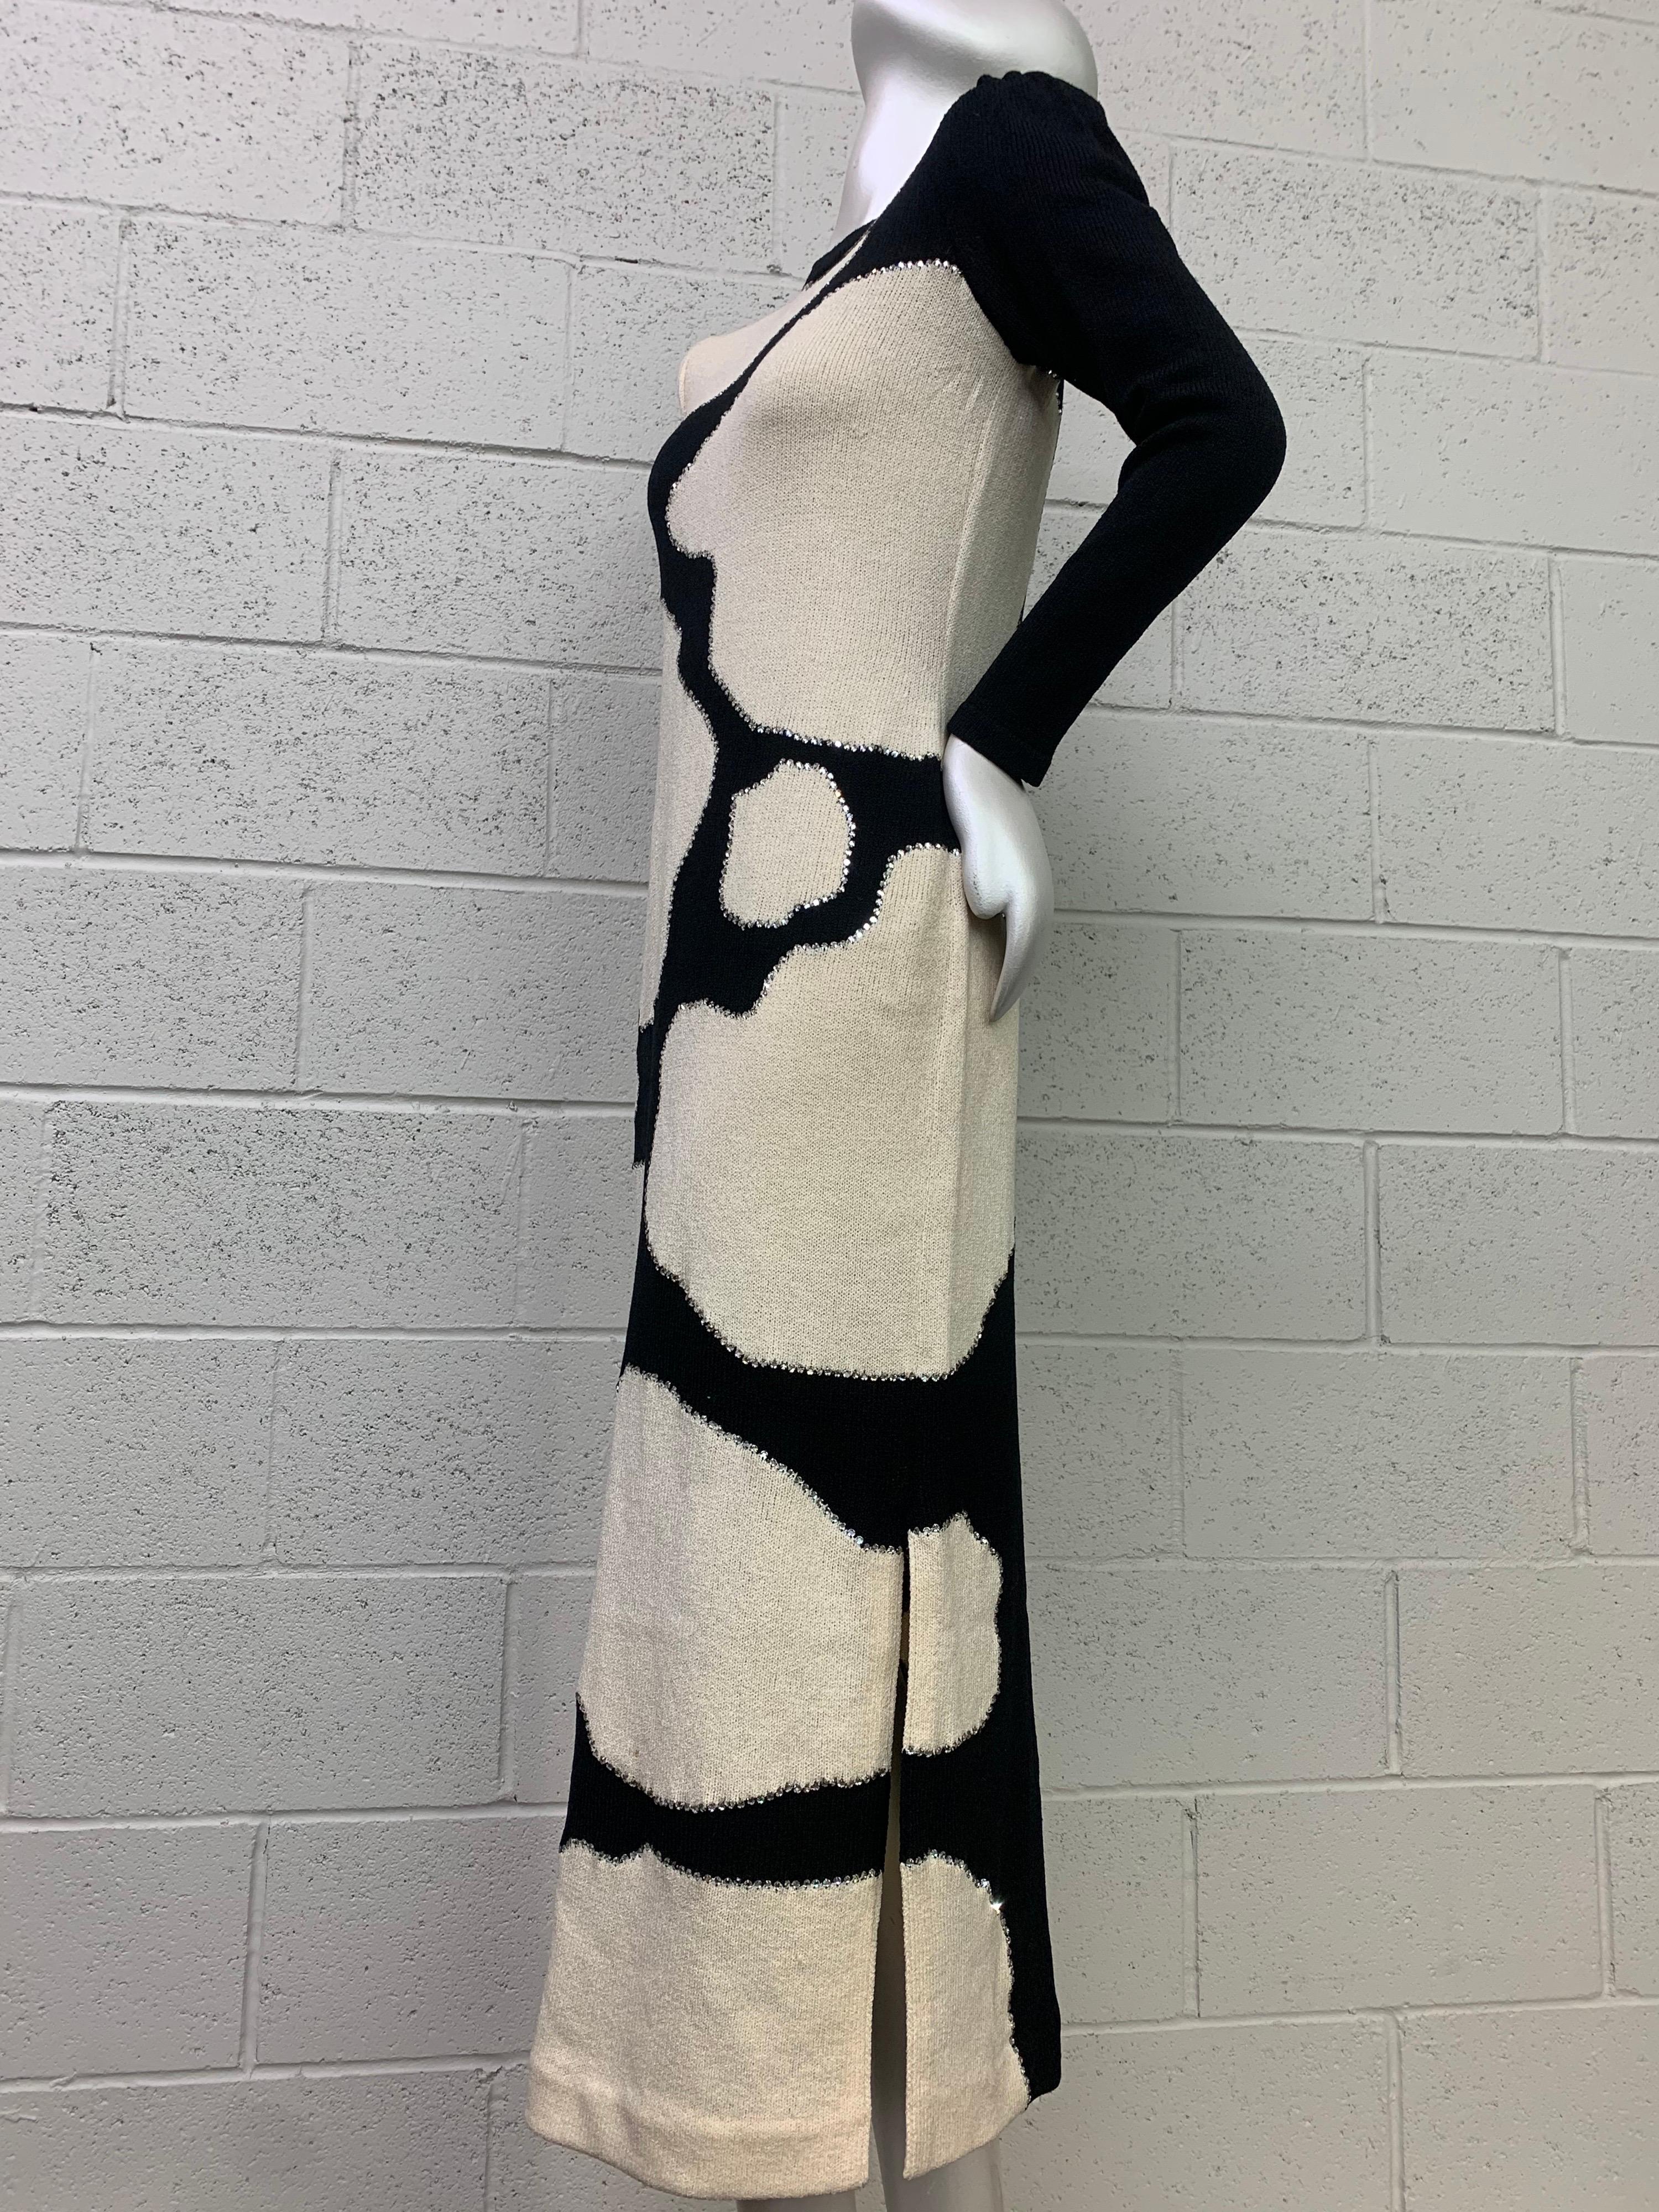 1970s Adolfo Black and White Graphic Maxi Knit Dress w/ Rhinestone Accents For Sale 6